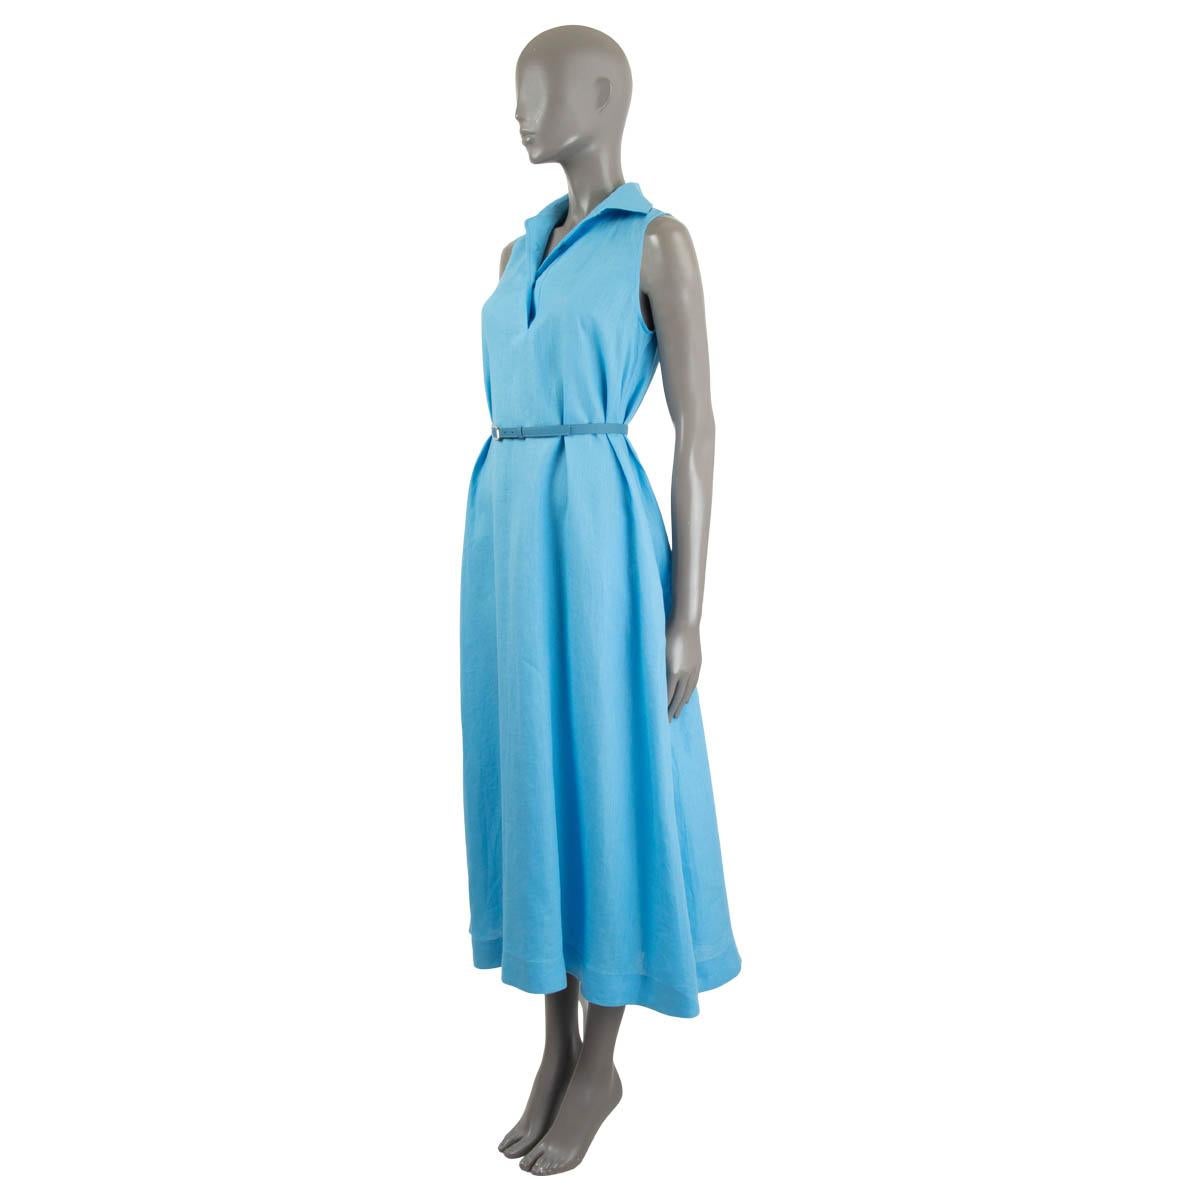 100% authentic Loro Piana Leyla belted sleeveless shirt dress in light blue linen (100%). The fabric is treated with aloe vera for a wrinkle-resisting design you can pack with ease. It's cinched at the waist with a logo-engraved nappa leather belt.